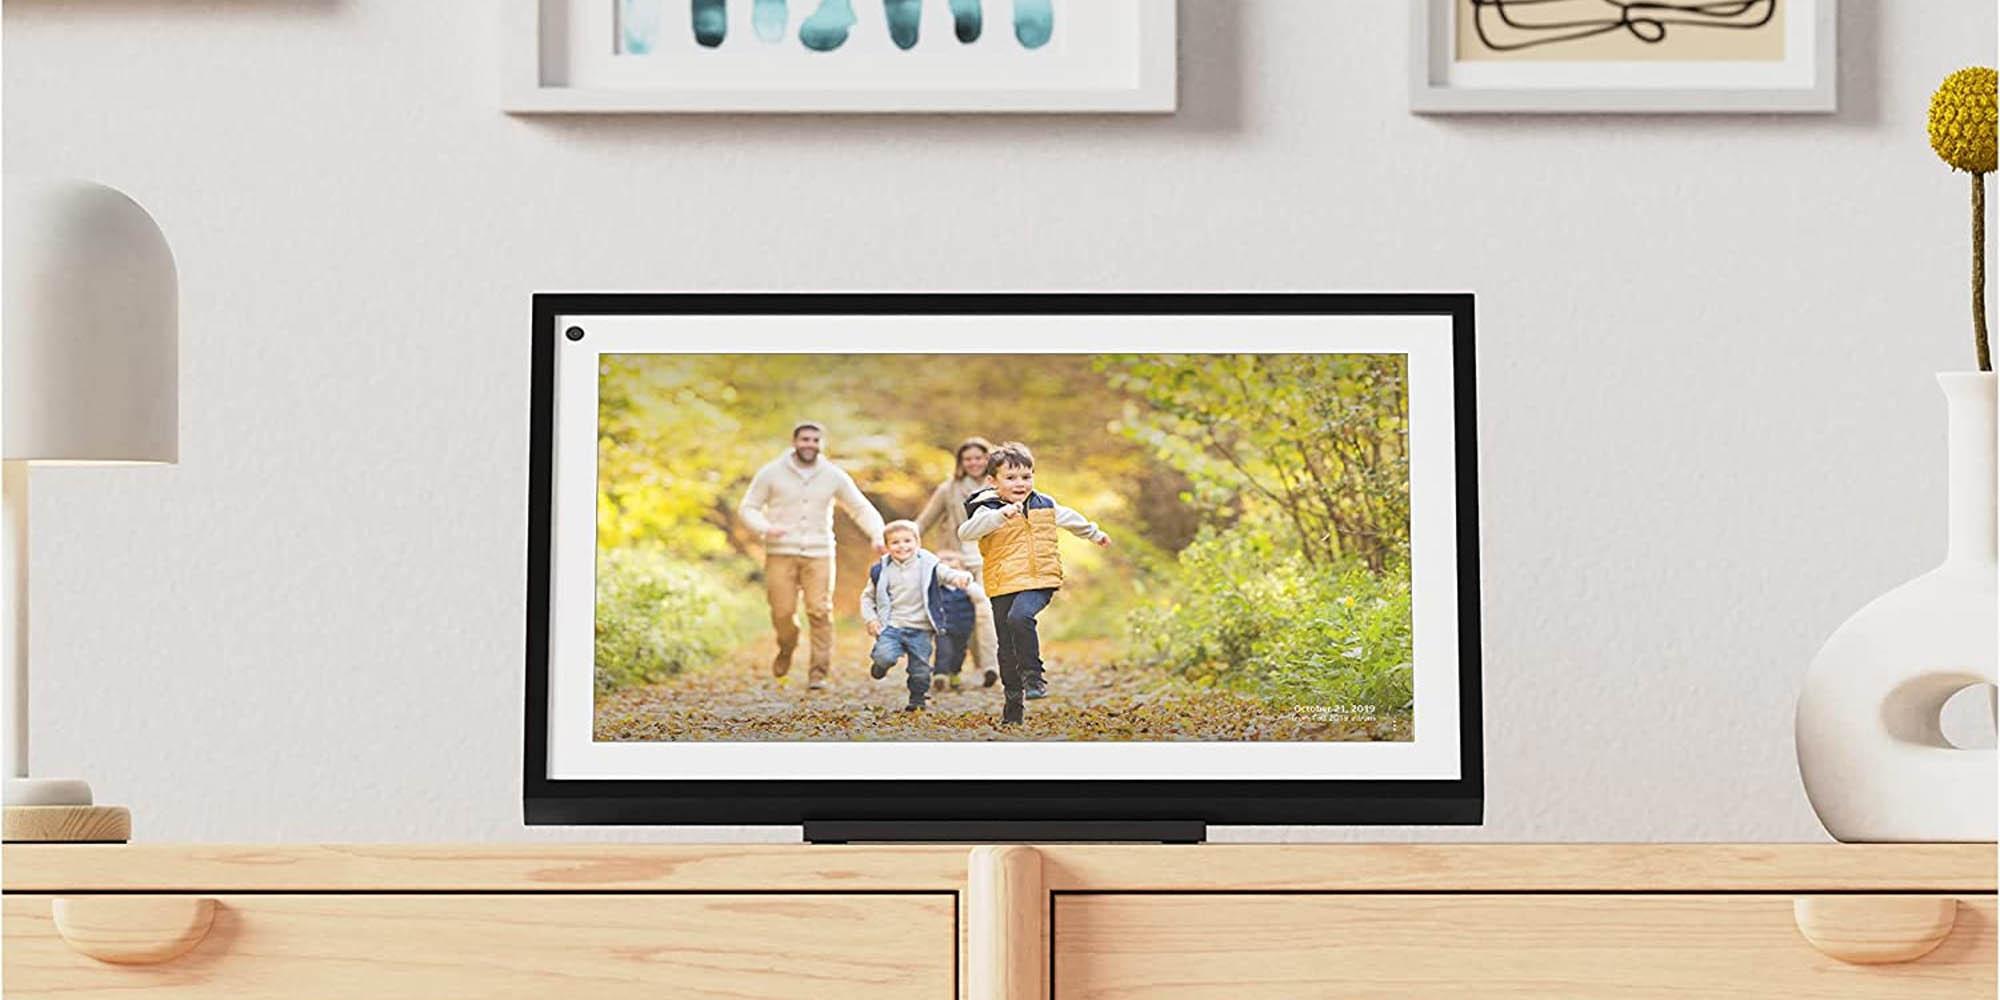 Echo Show 15 w/ Alexa Only $149.99 Shipped (Reg. $250), Great for a  Family Hub!